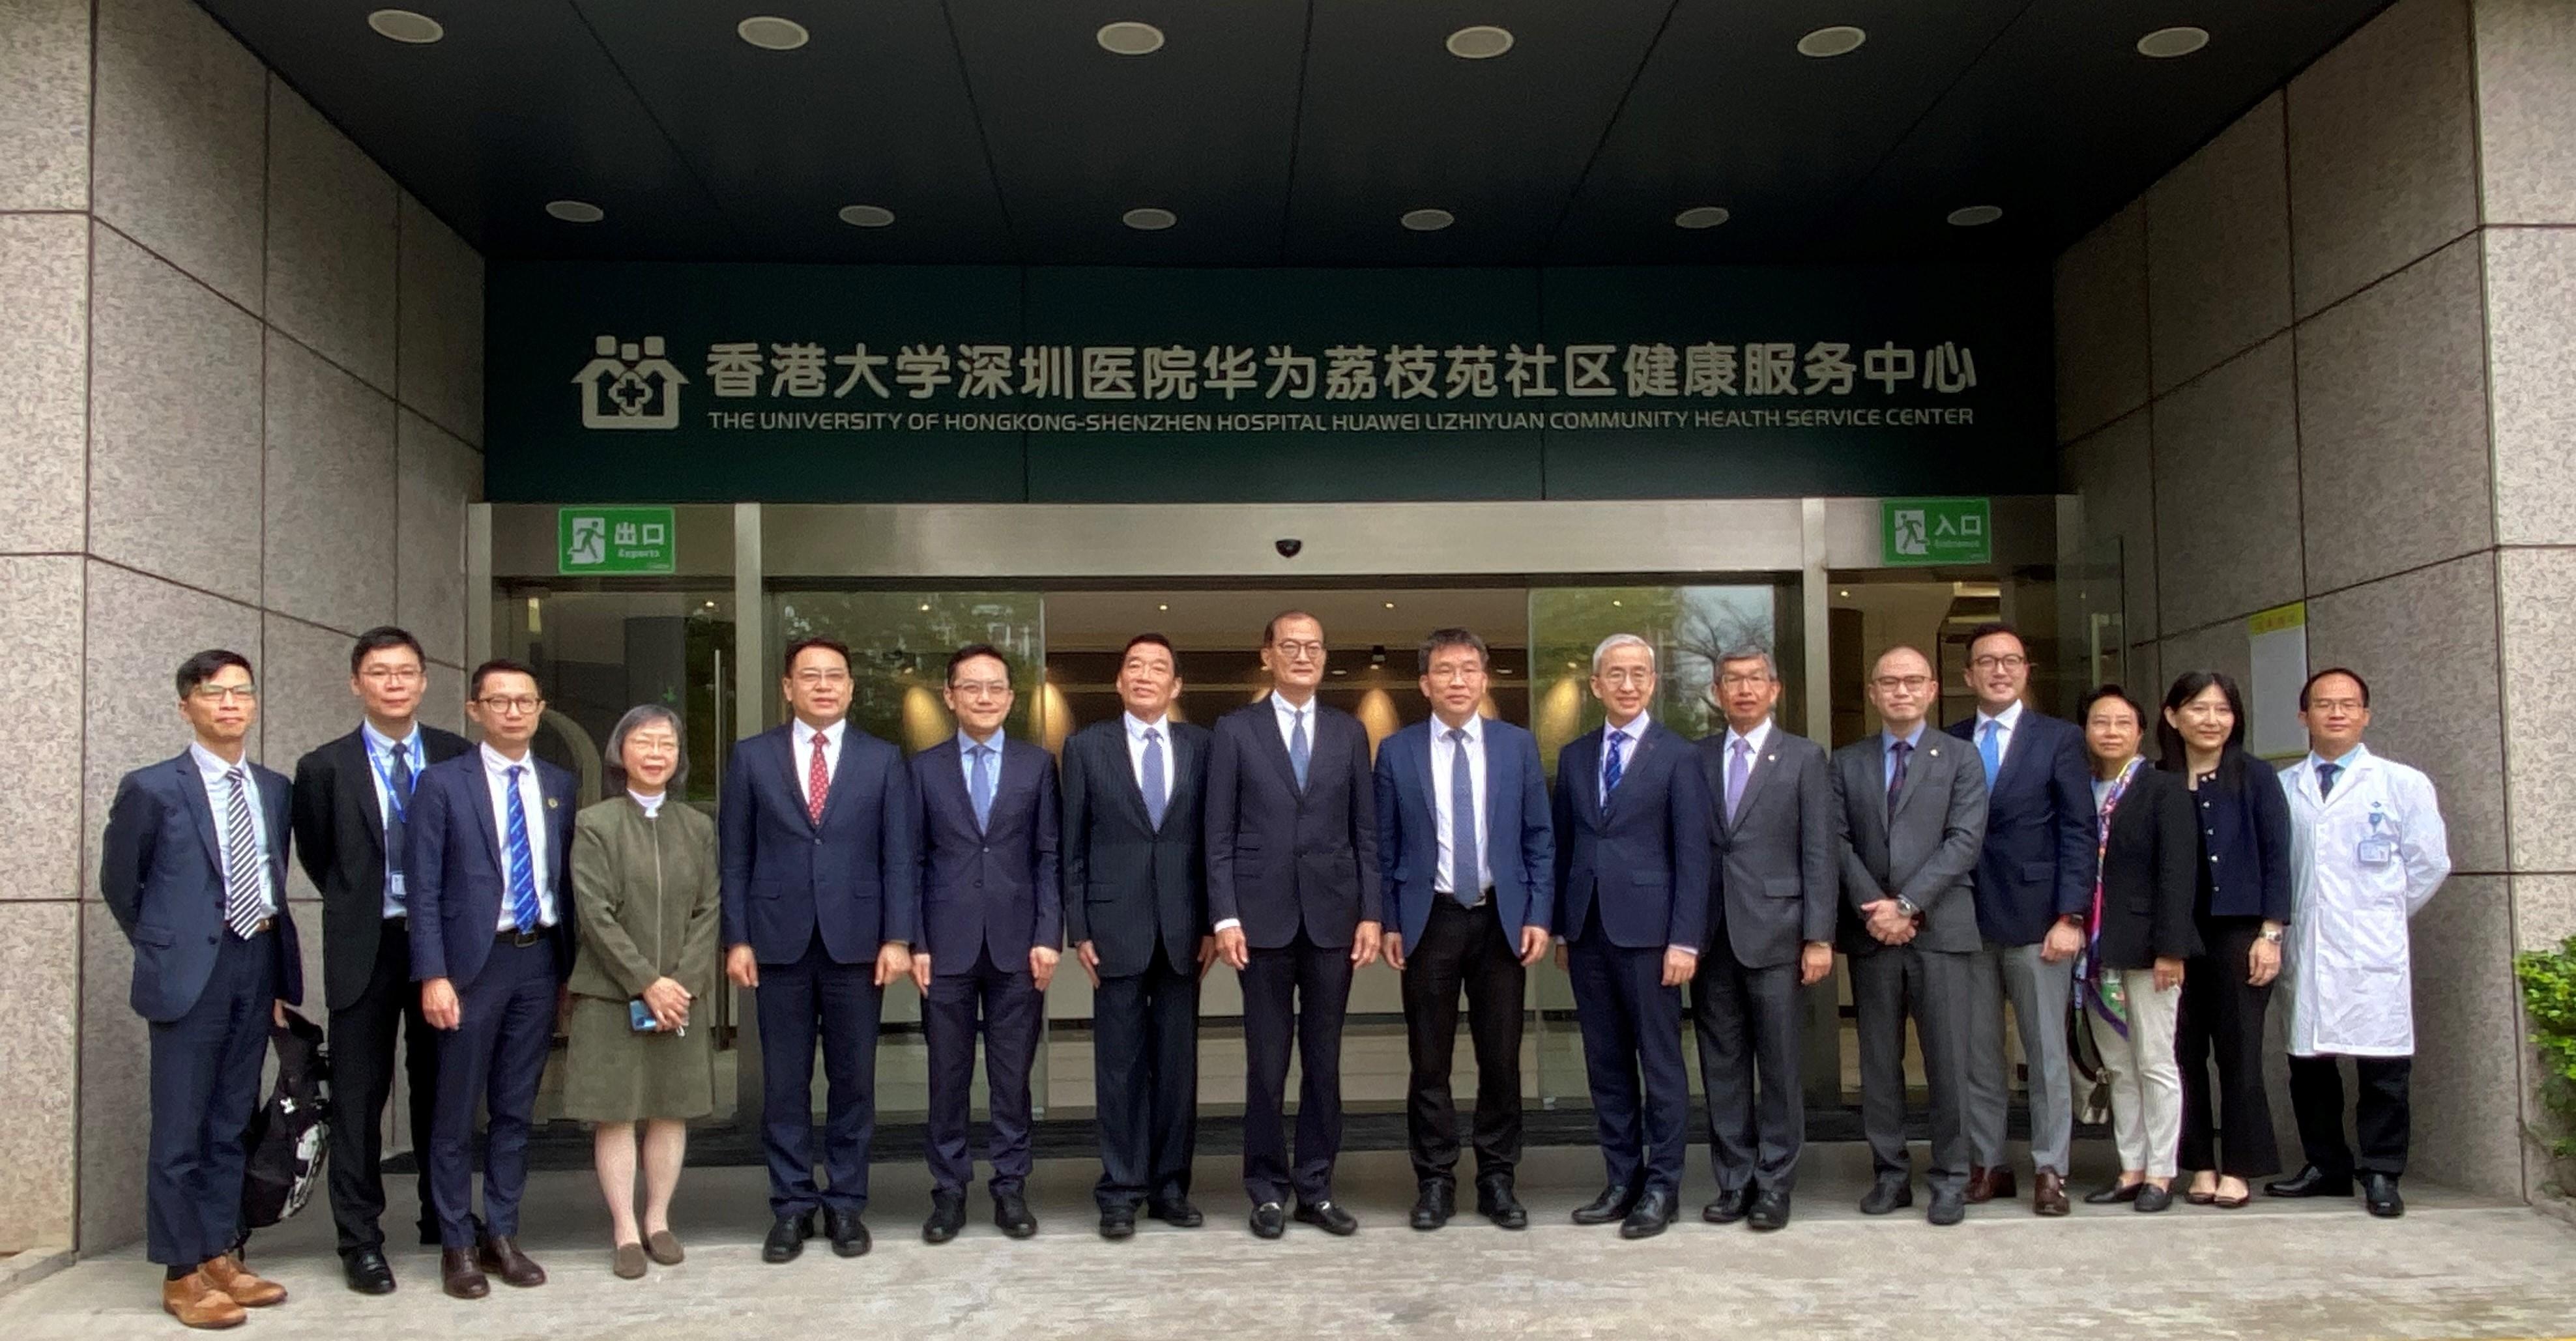 The Secretary for Health, Professor Lo Chung-mau, and his delegation visited the Huawei Li Zhi Yuan Community Health Service Center of the University of Hong Kong - Shenzhen Hospital this morning (March 31). Photo shows Professor Lo (eighth left); the Director of Health, Dr Ronald Lam (sixth left); the Chairman of the Hospital Authority, Mr Henry Fan (seventh left); other members of the delegation and staff of the Community Health Service Center.